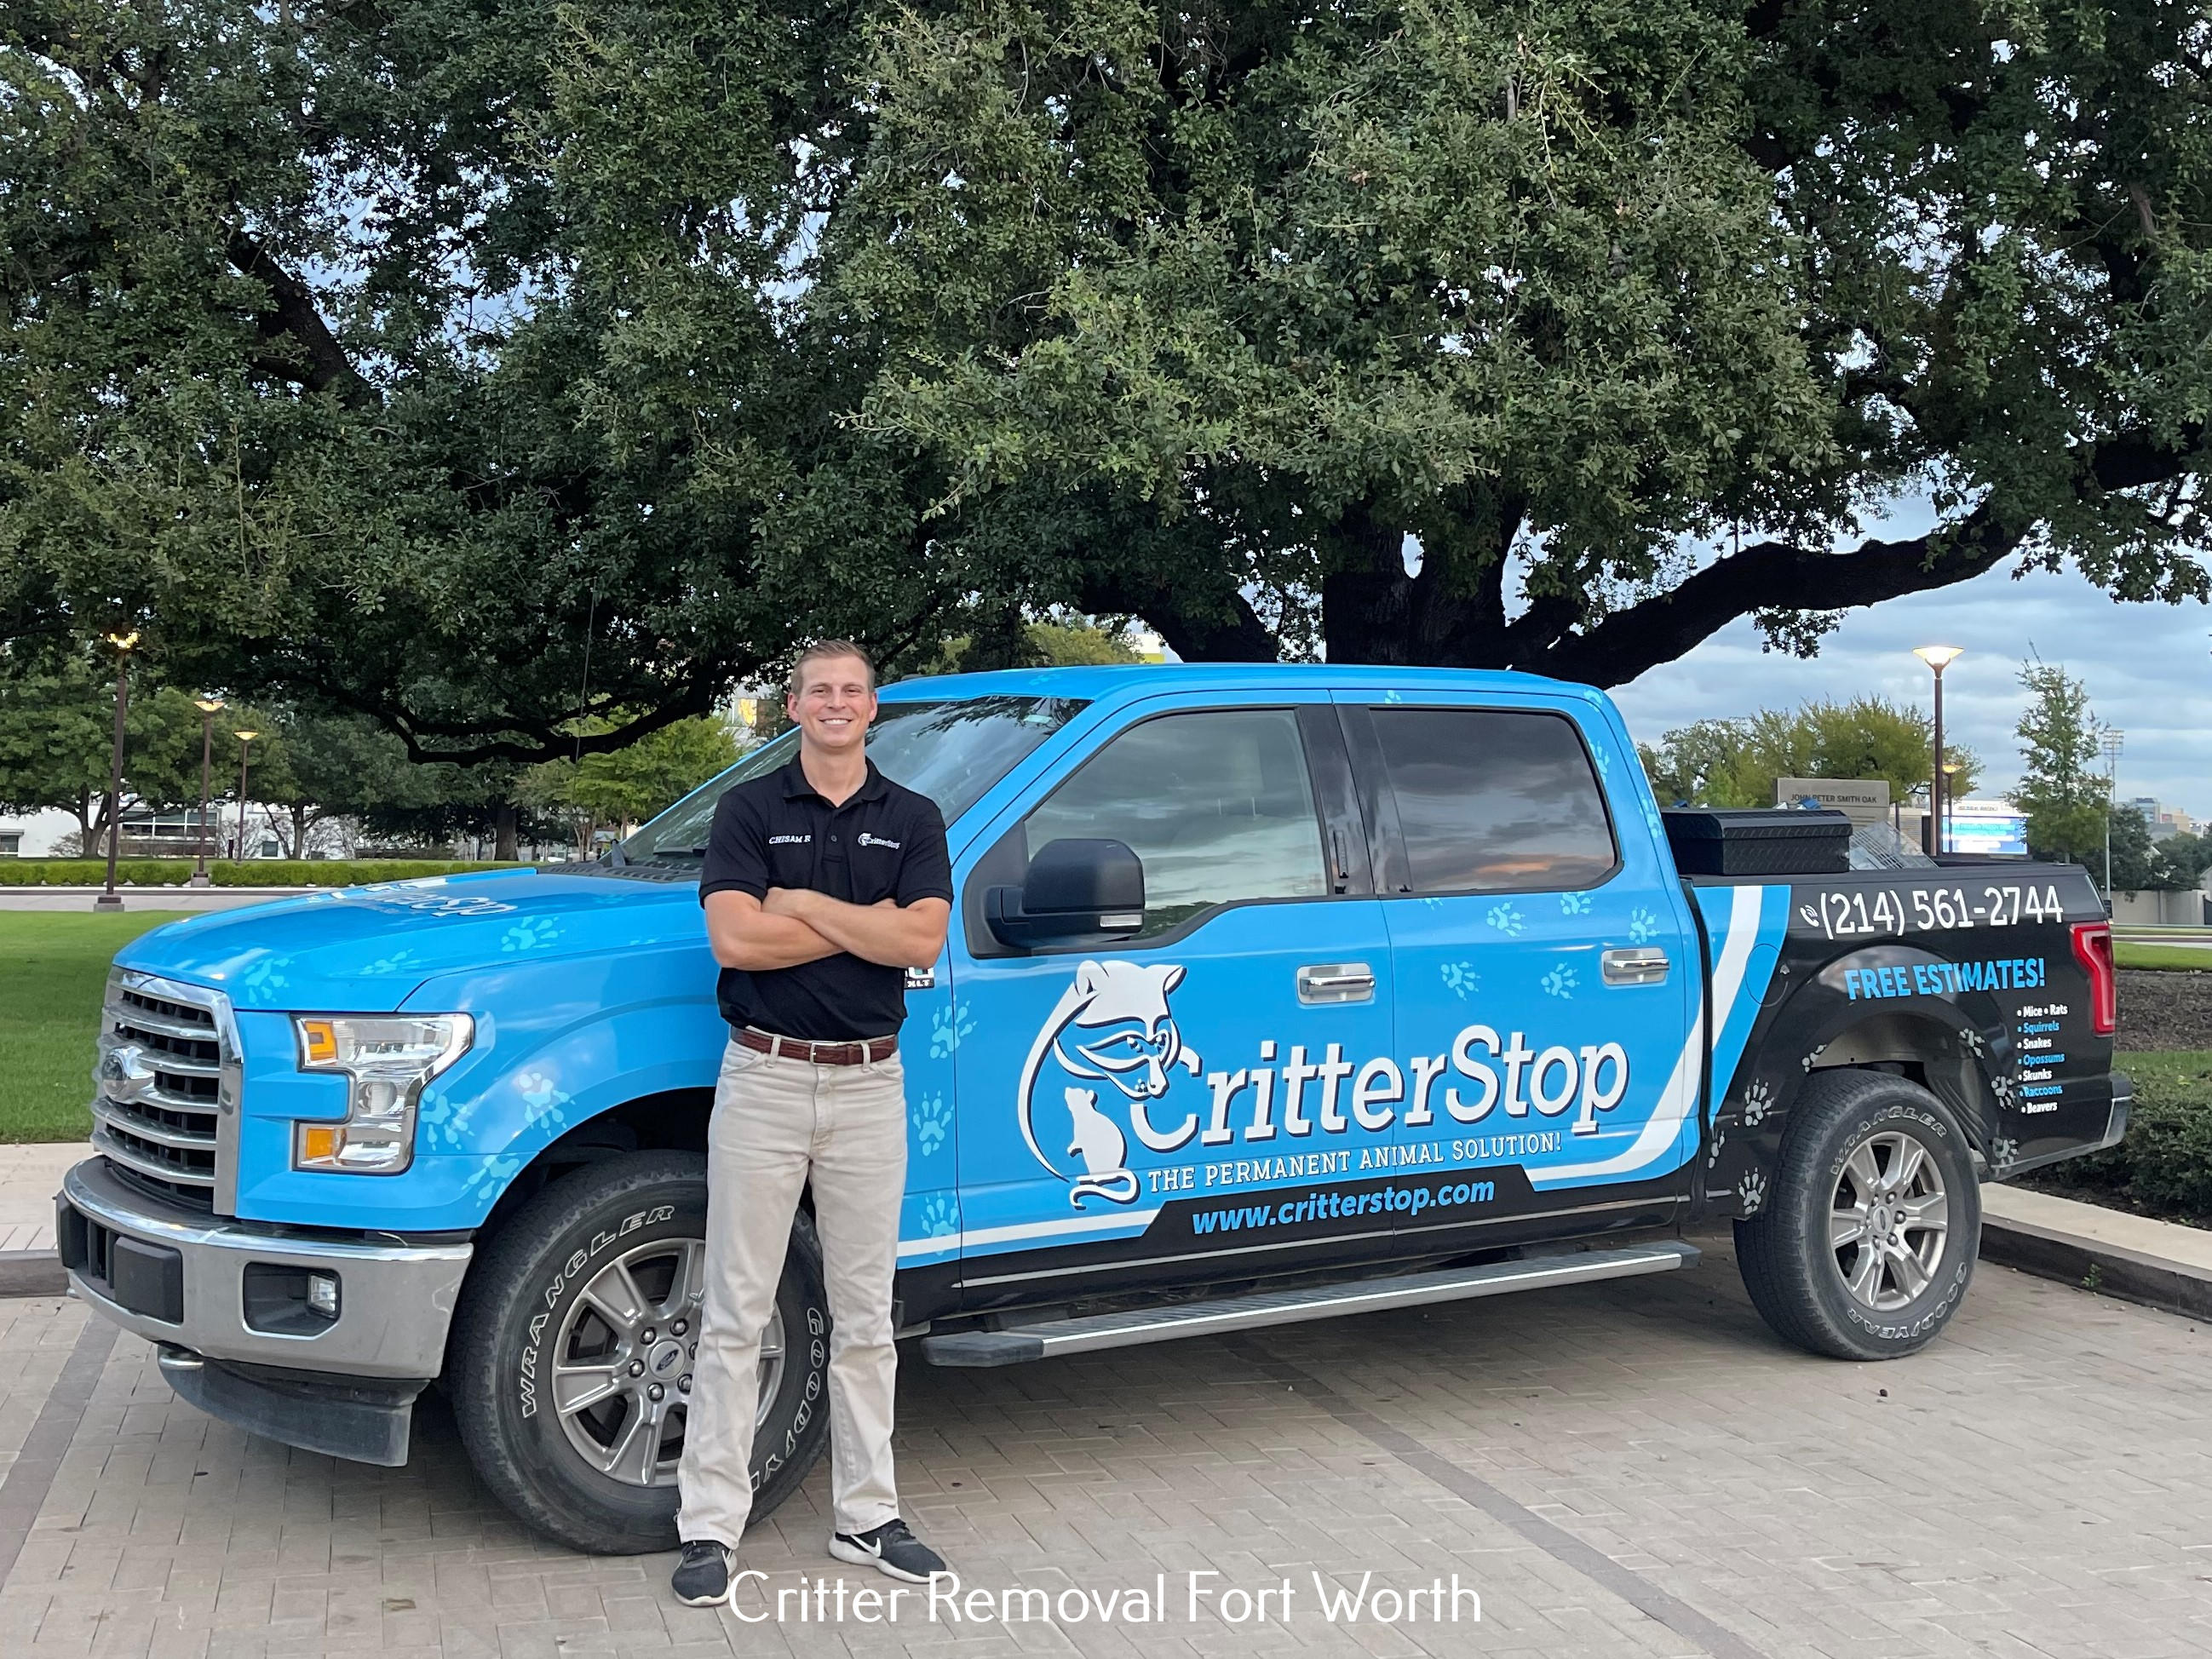 Critter Stop Explains The Tips For Choosing An Animal Removal Company